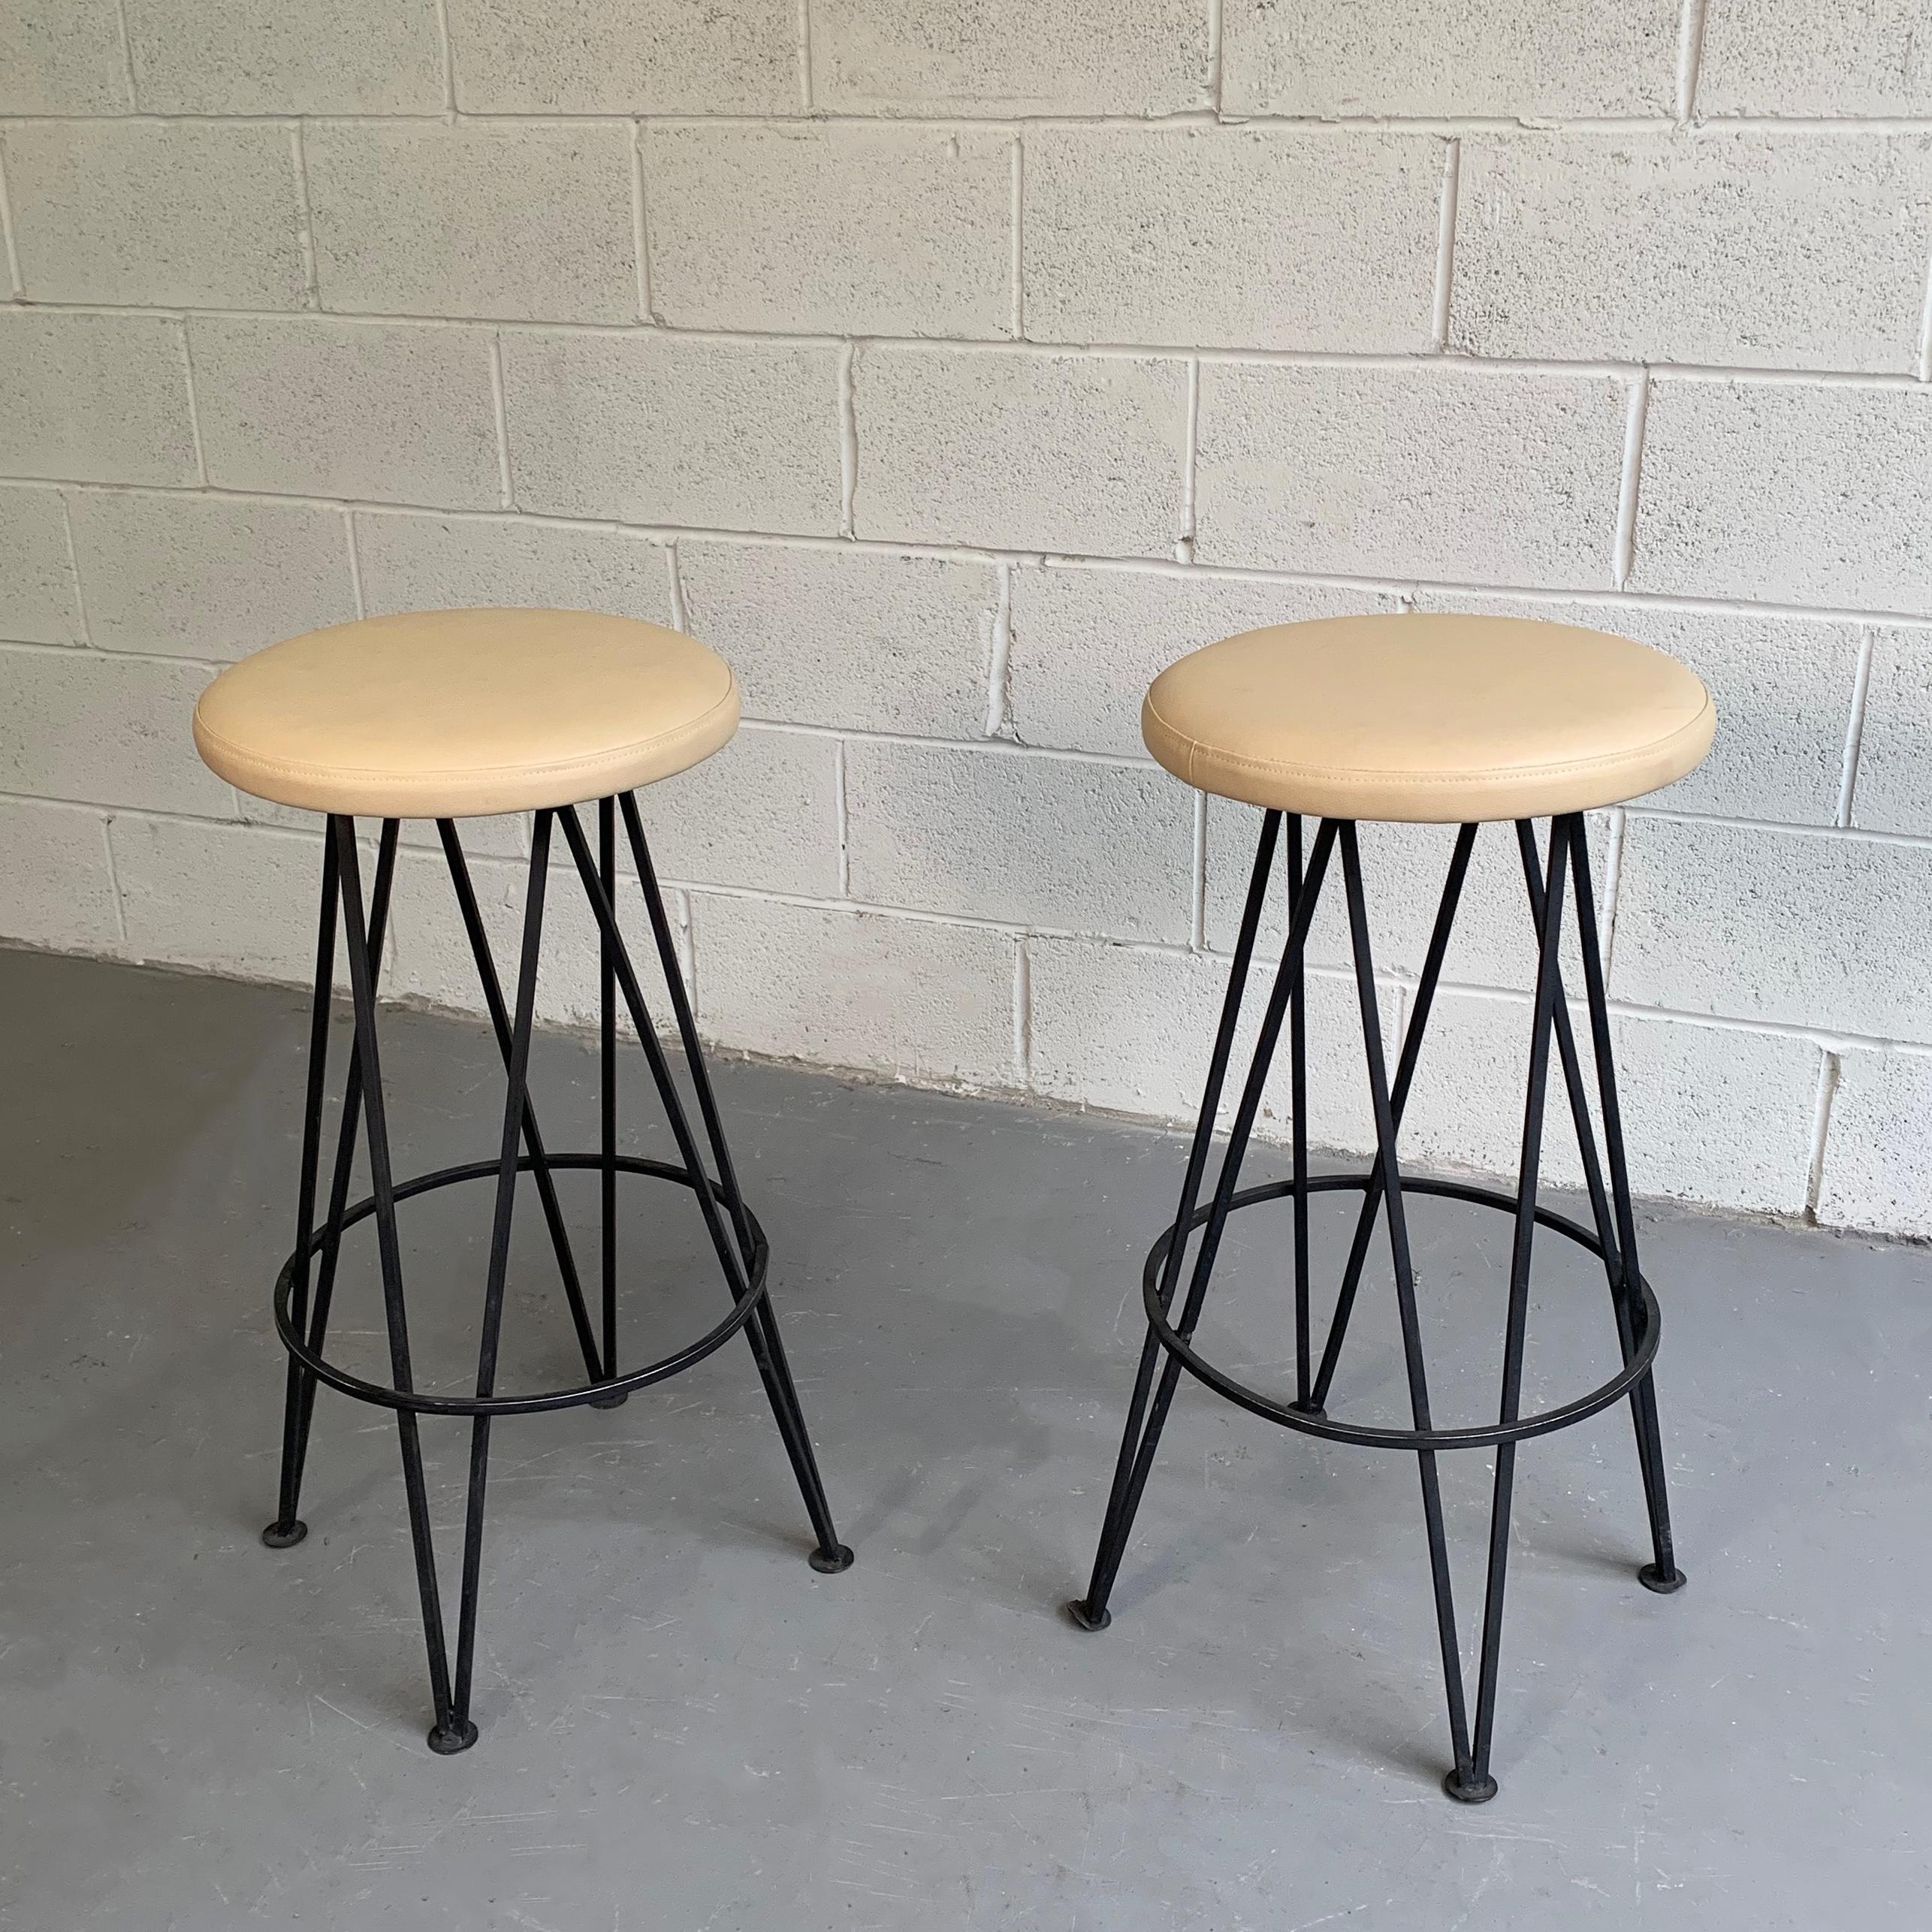 Pair of Mid-Century Modern, bar stools feature hairpin, wrought iron bases with newly upholstered, measures: 14 inch diameter, blush-beige vinyl seats.